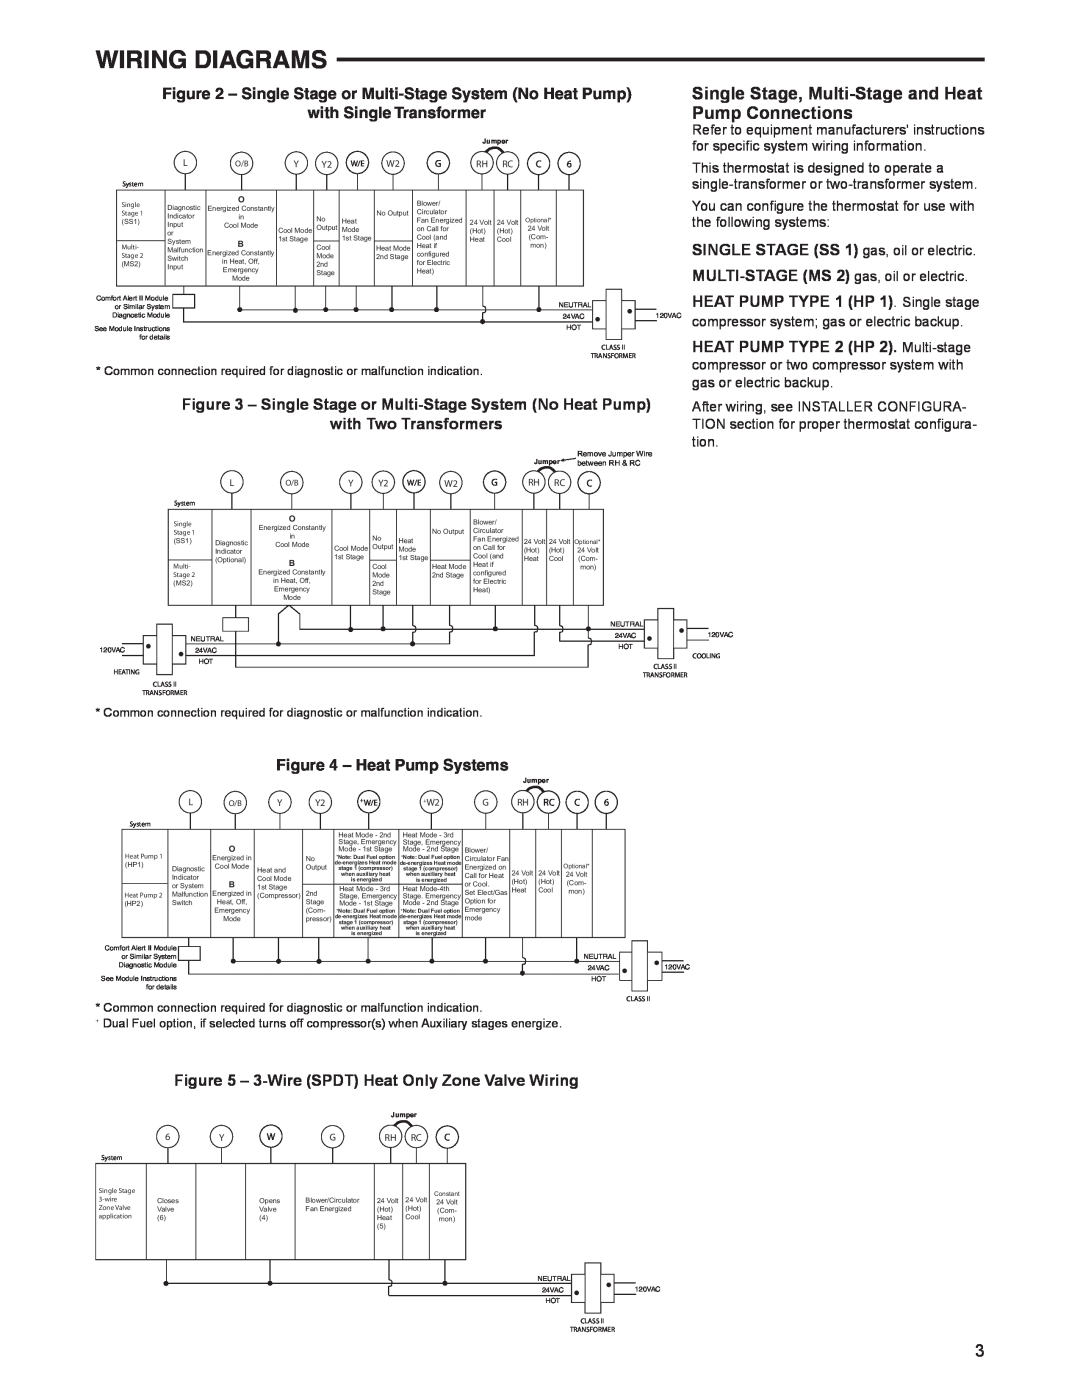 White Rodgers 1F95EZ-0671 Wiring Diagrams, with Single Transformer, HEAT PUMP TYPE 1 HP 1. Single stage, Heat Pump Systems 